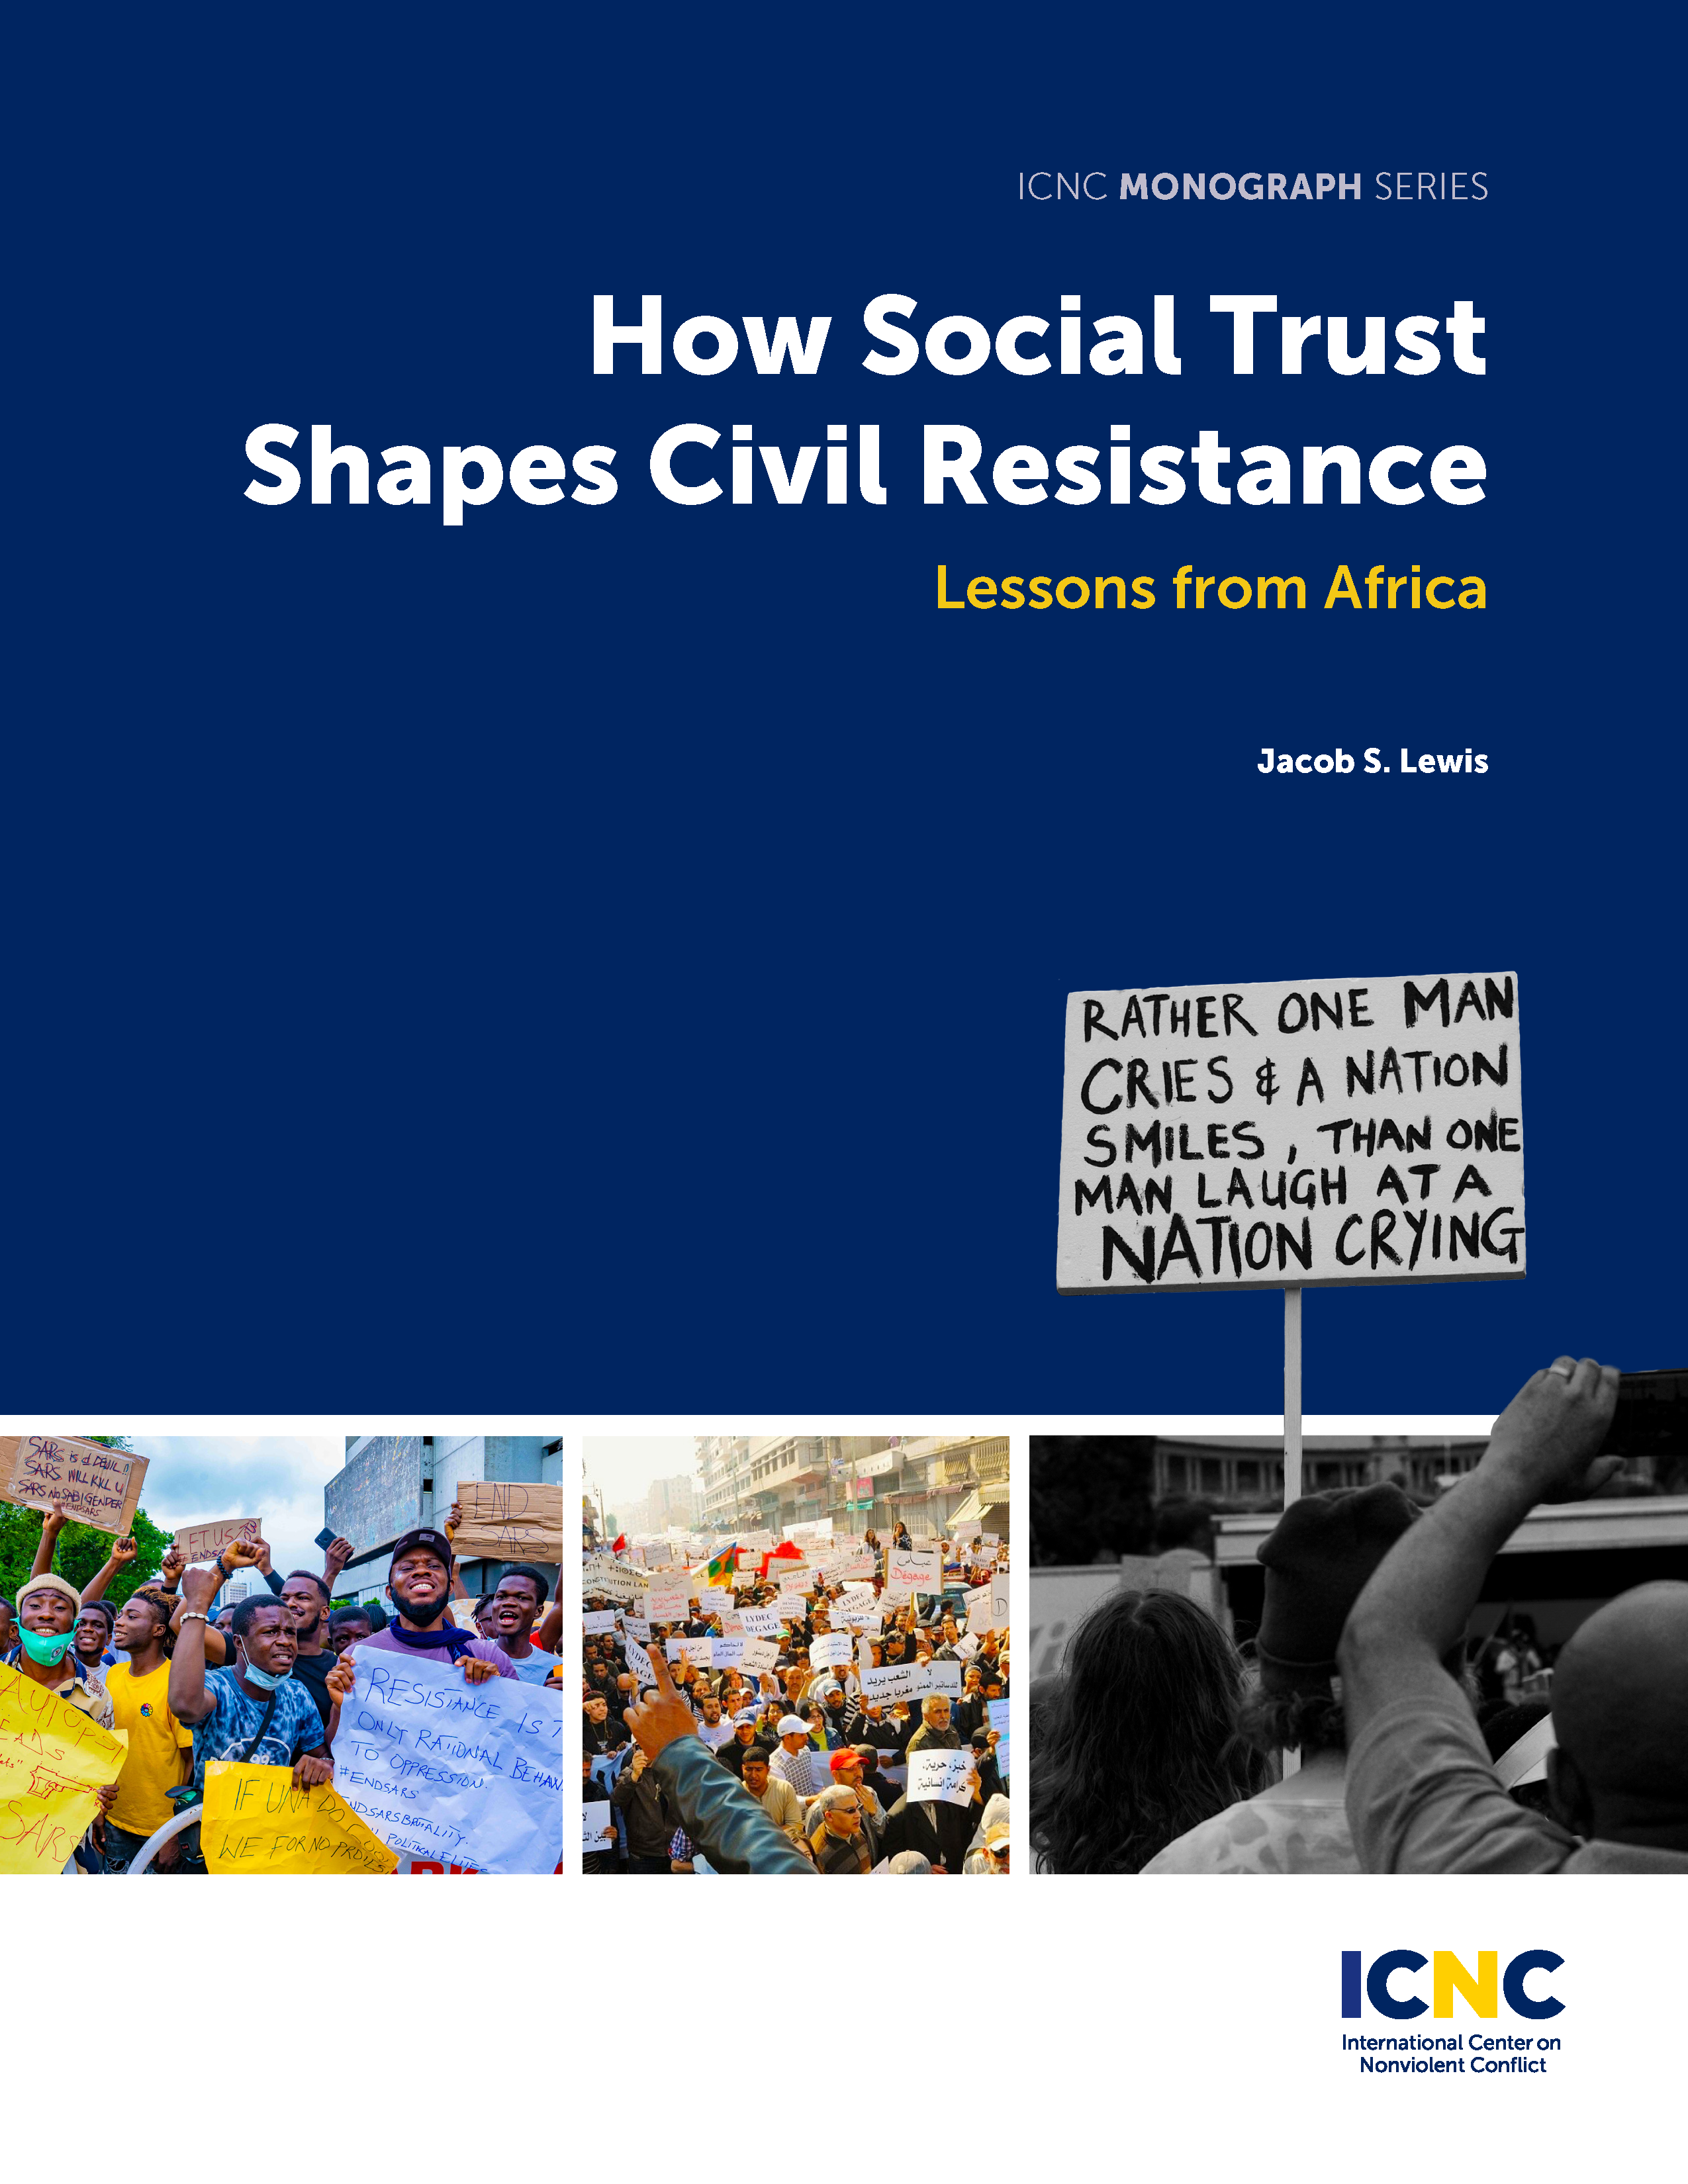 How Social Trust Shapes Civil Resistance: Lessons from Africa